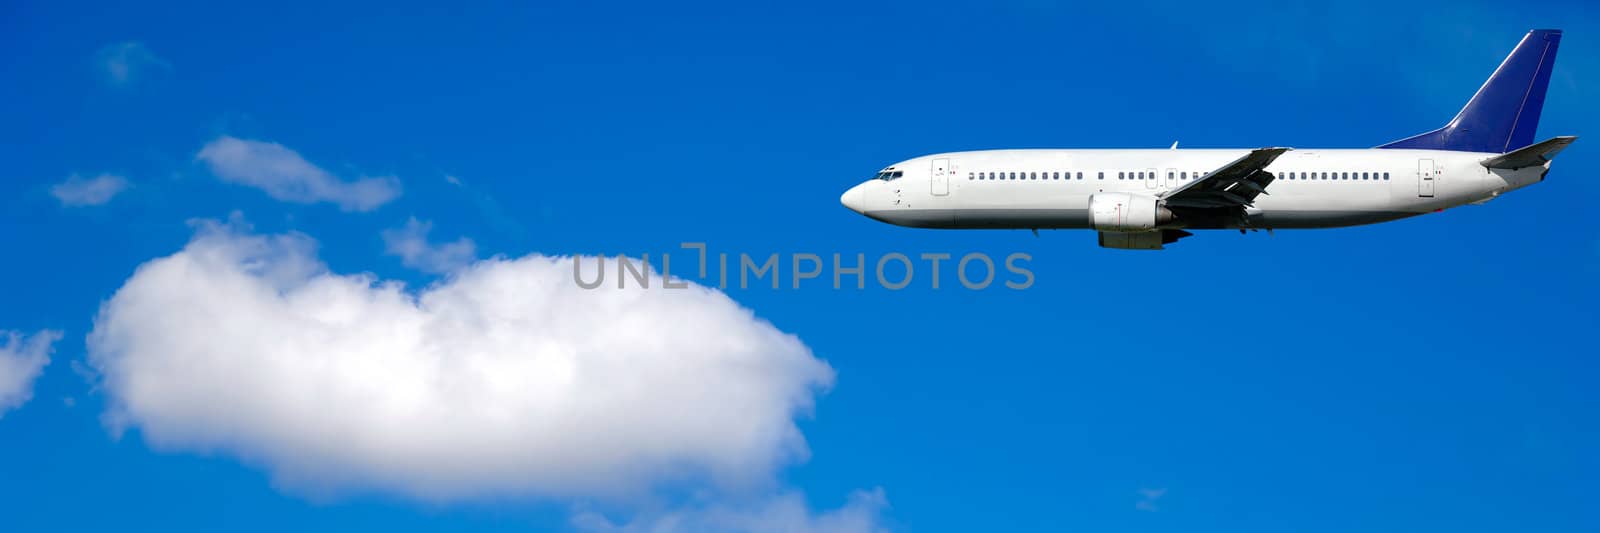 Air travel - Plane and cloud on blue sky by cfoto